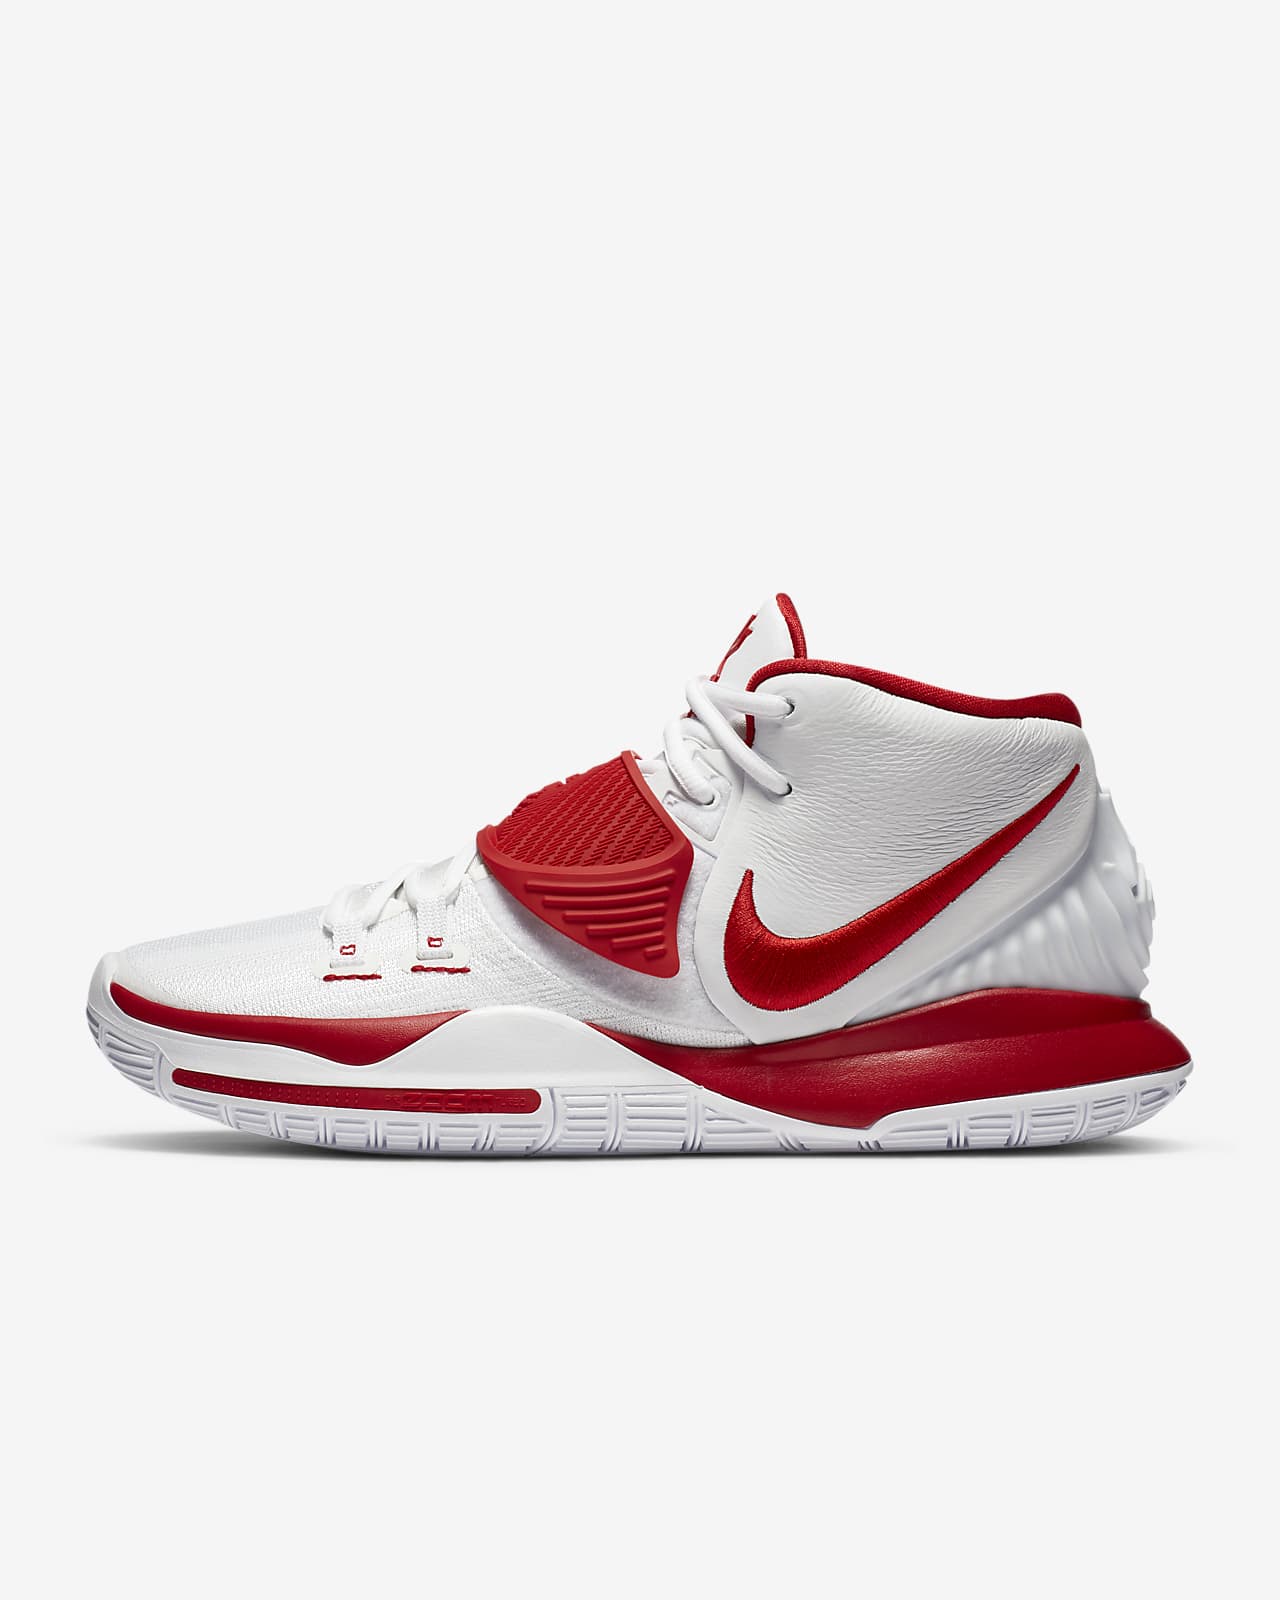 kyrie 6 red and white